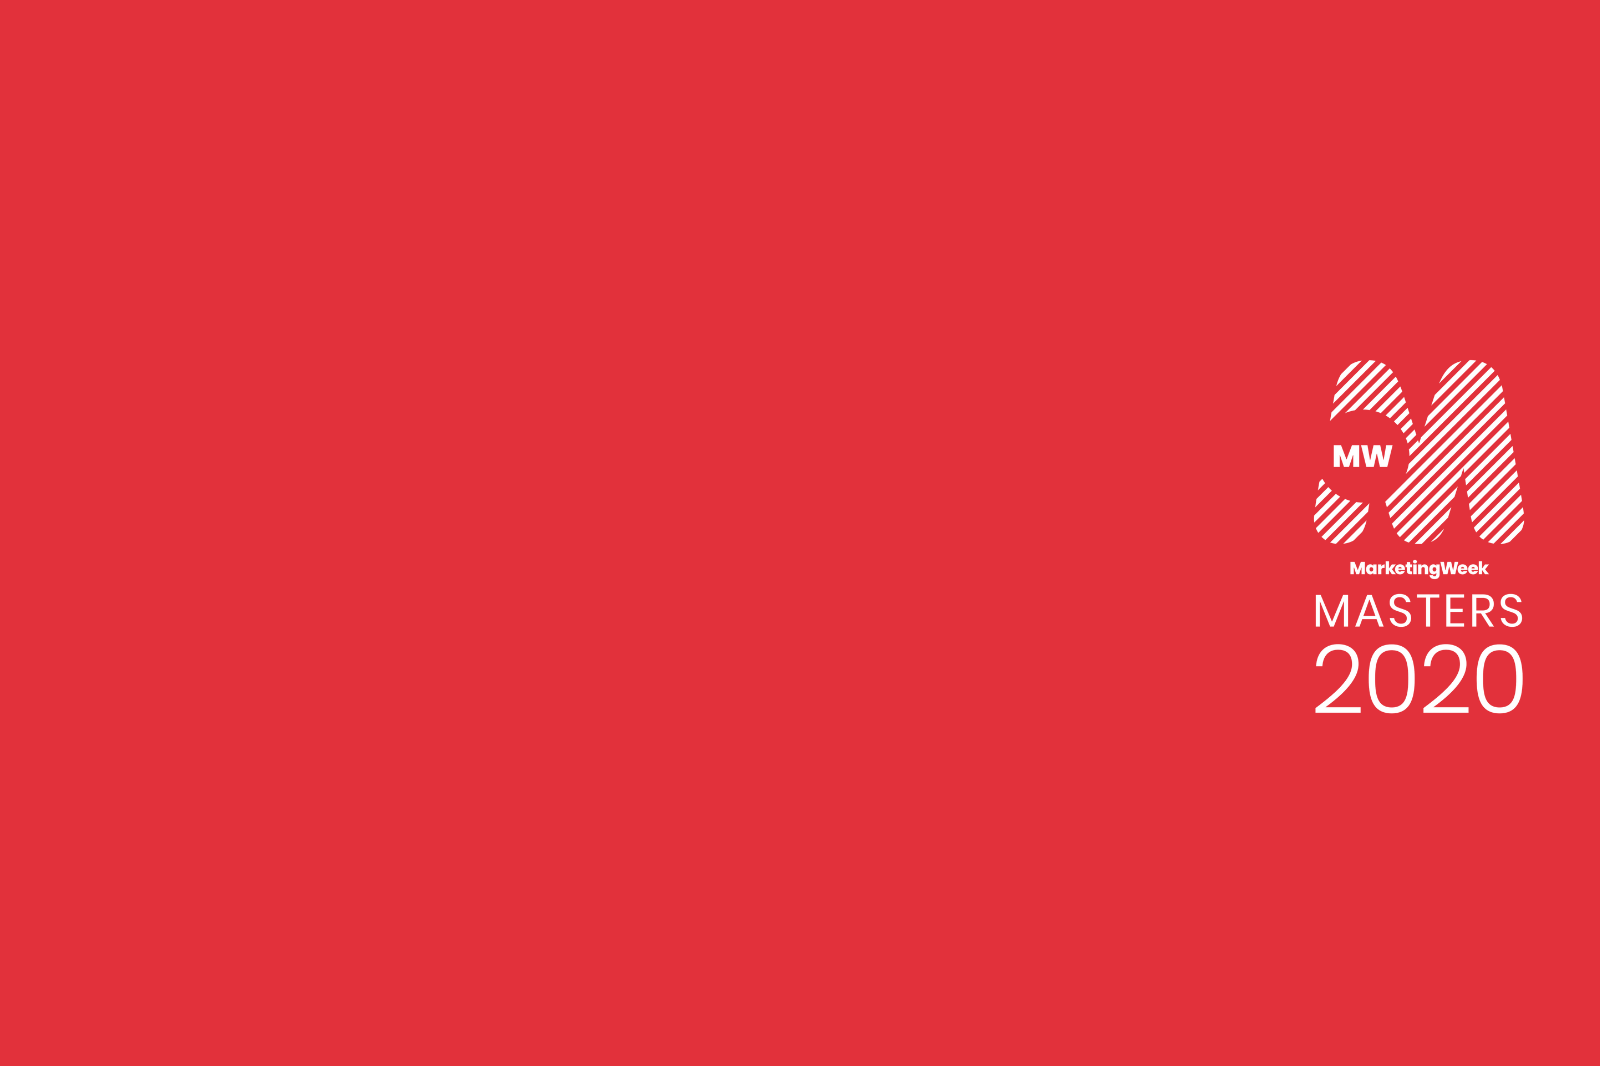 Masters 2020 logo on a red background, Marketing Week Agency of the Year.